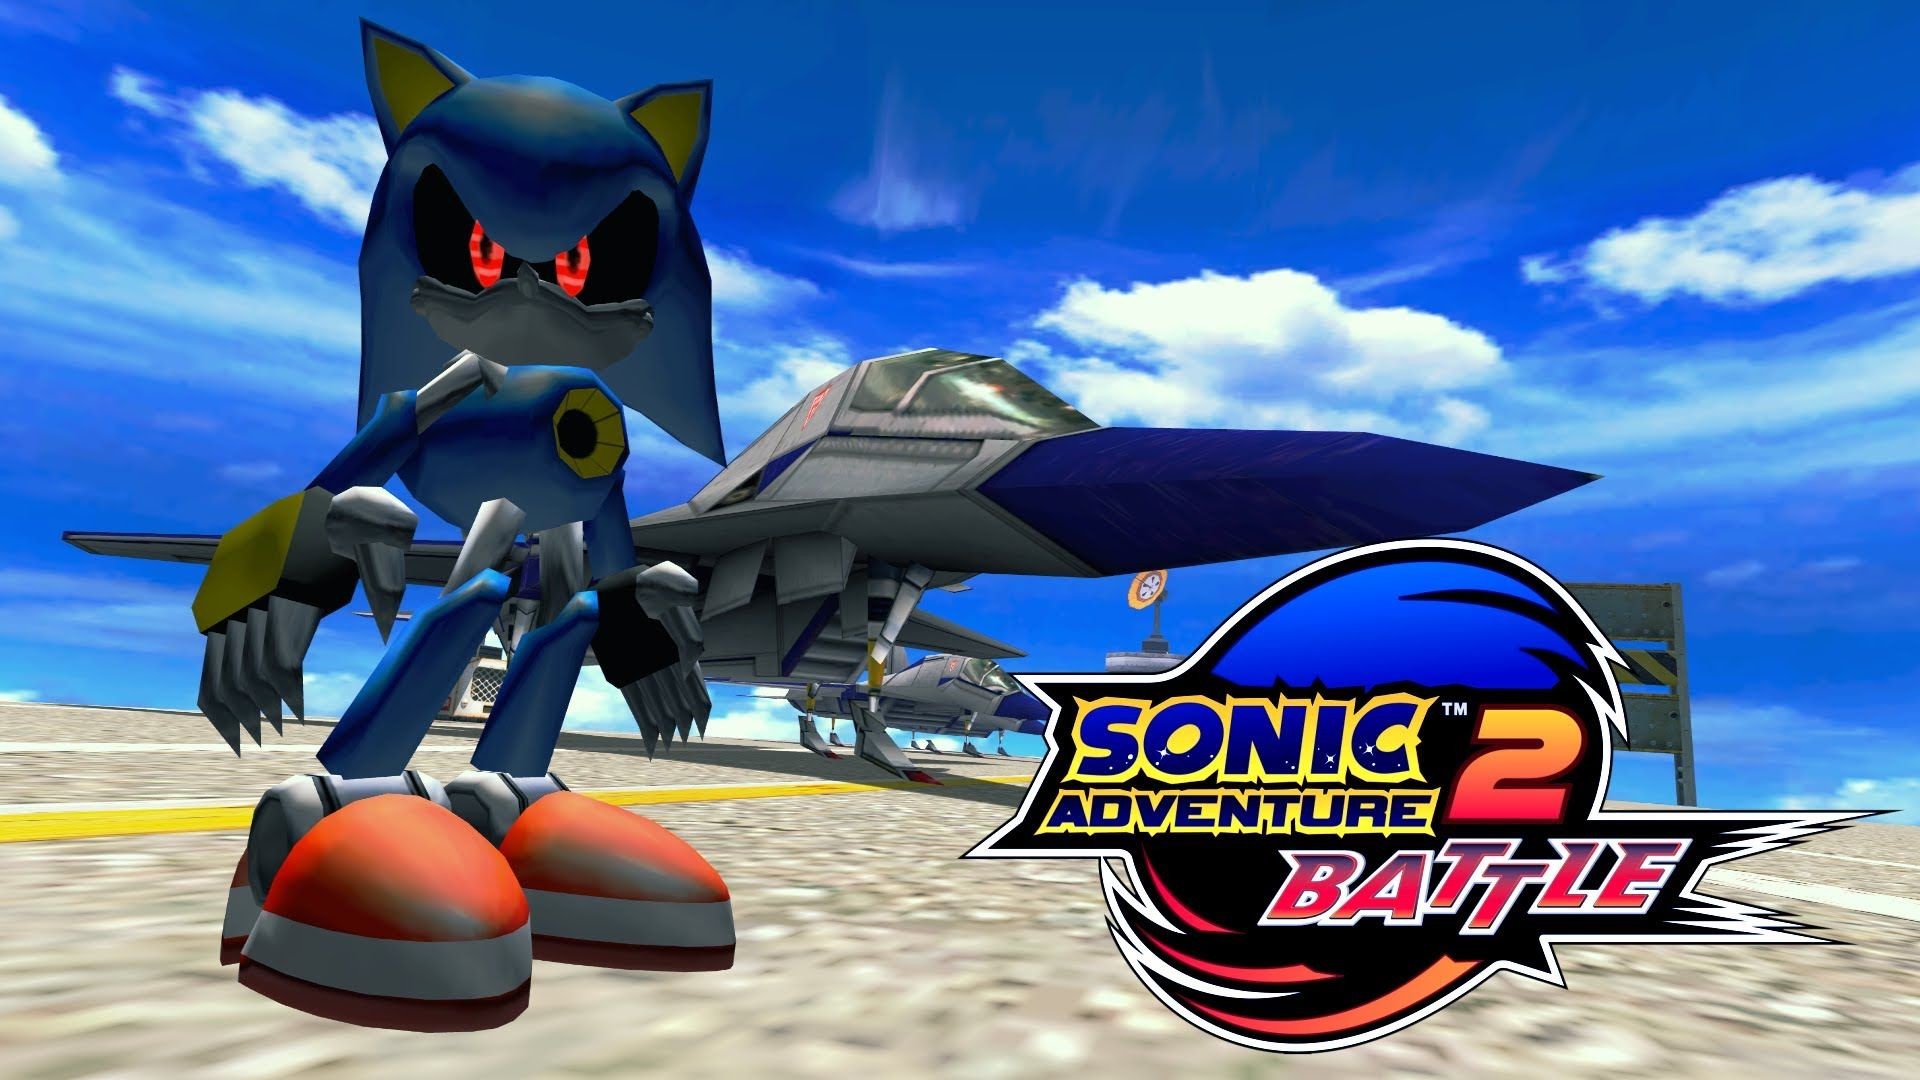 1920x1080 Sonic Adventure 2: Battle - Weapons Bed - Metal Sonic [REAL Full .